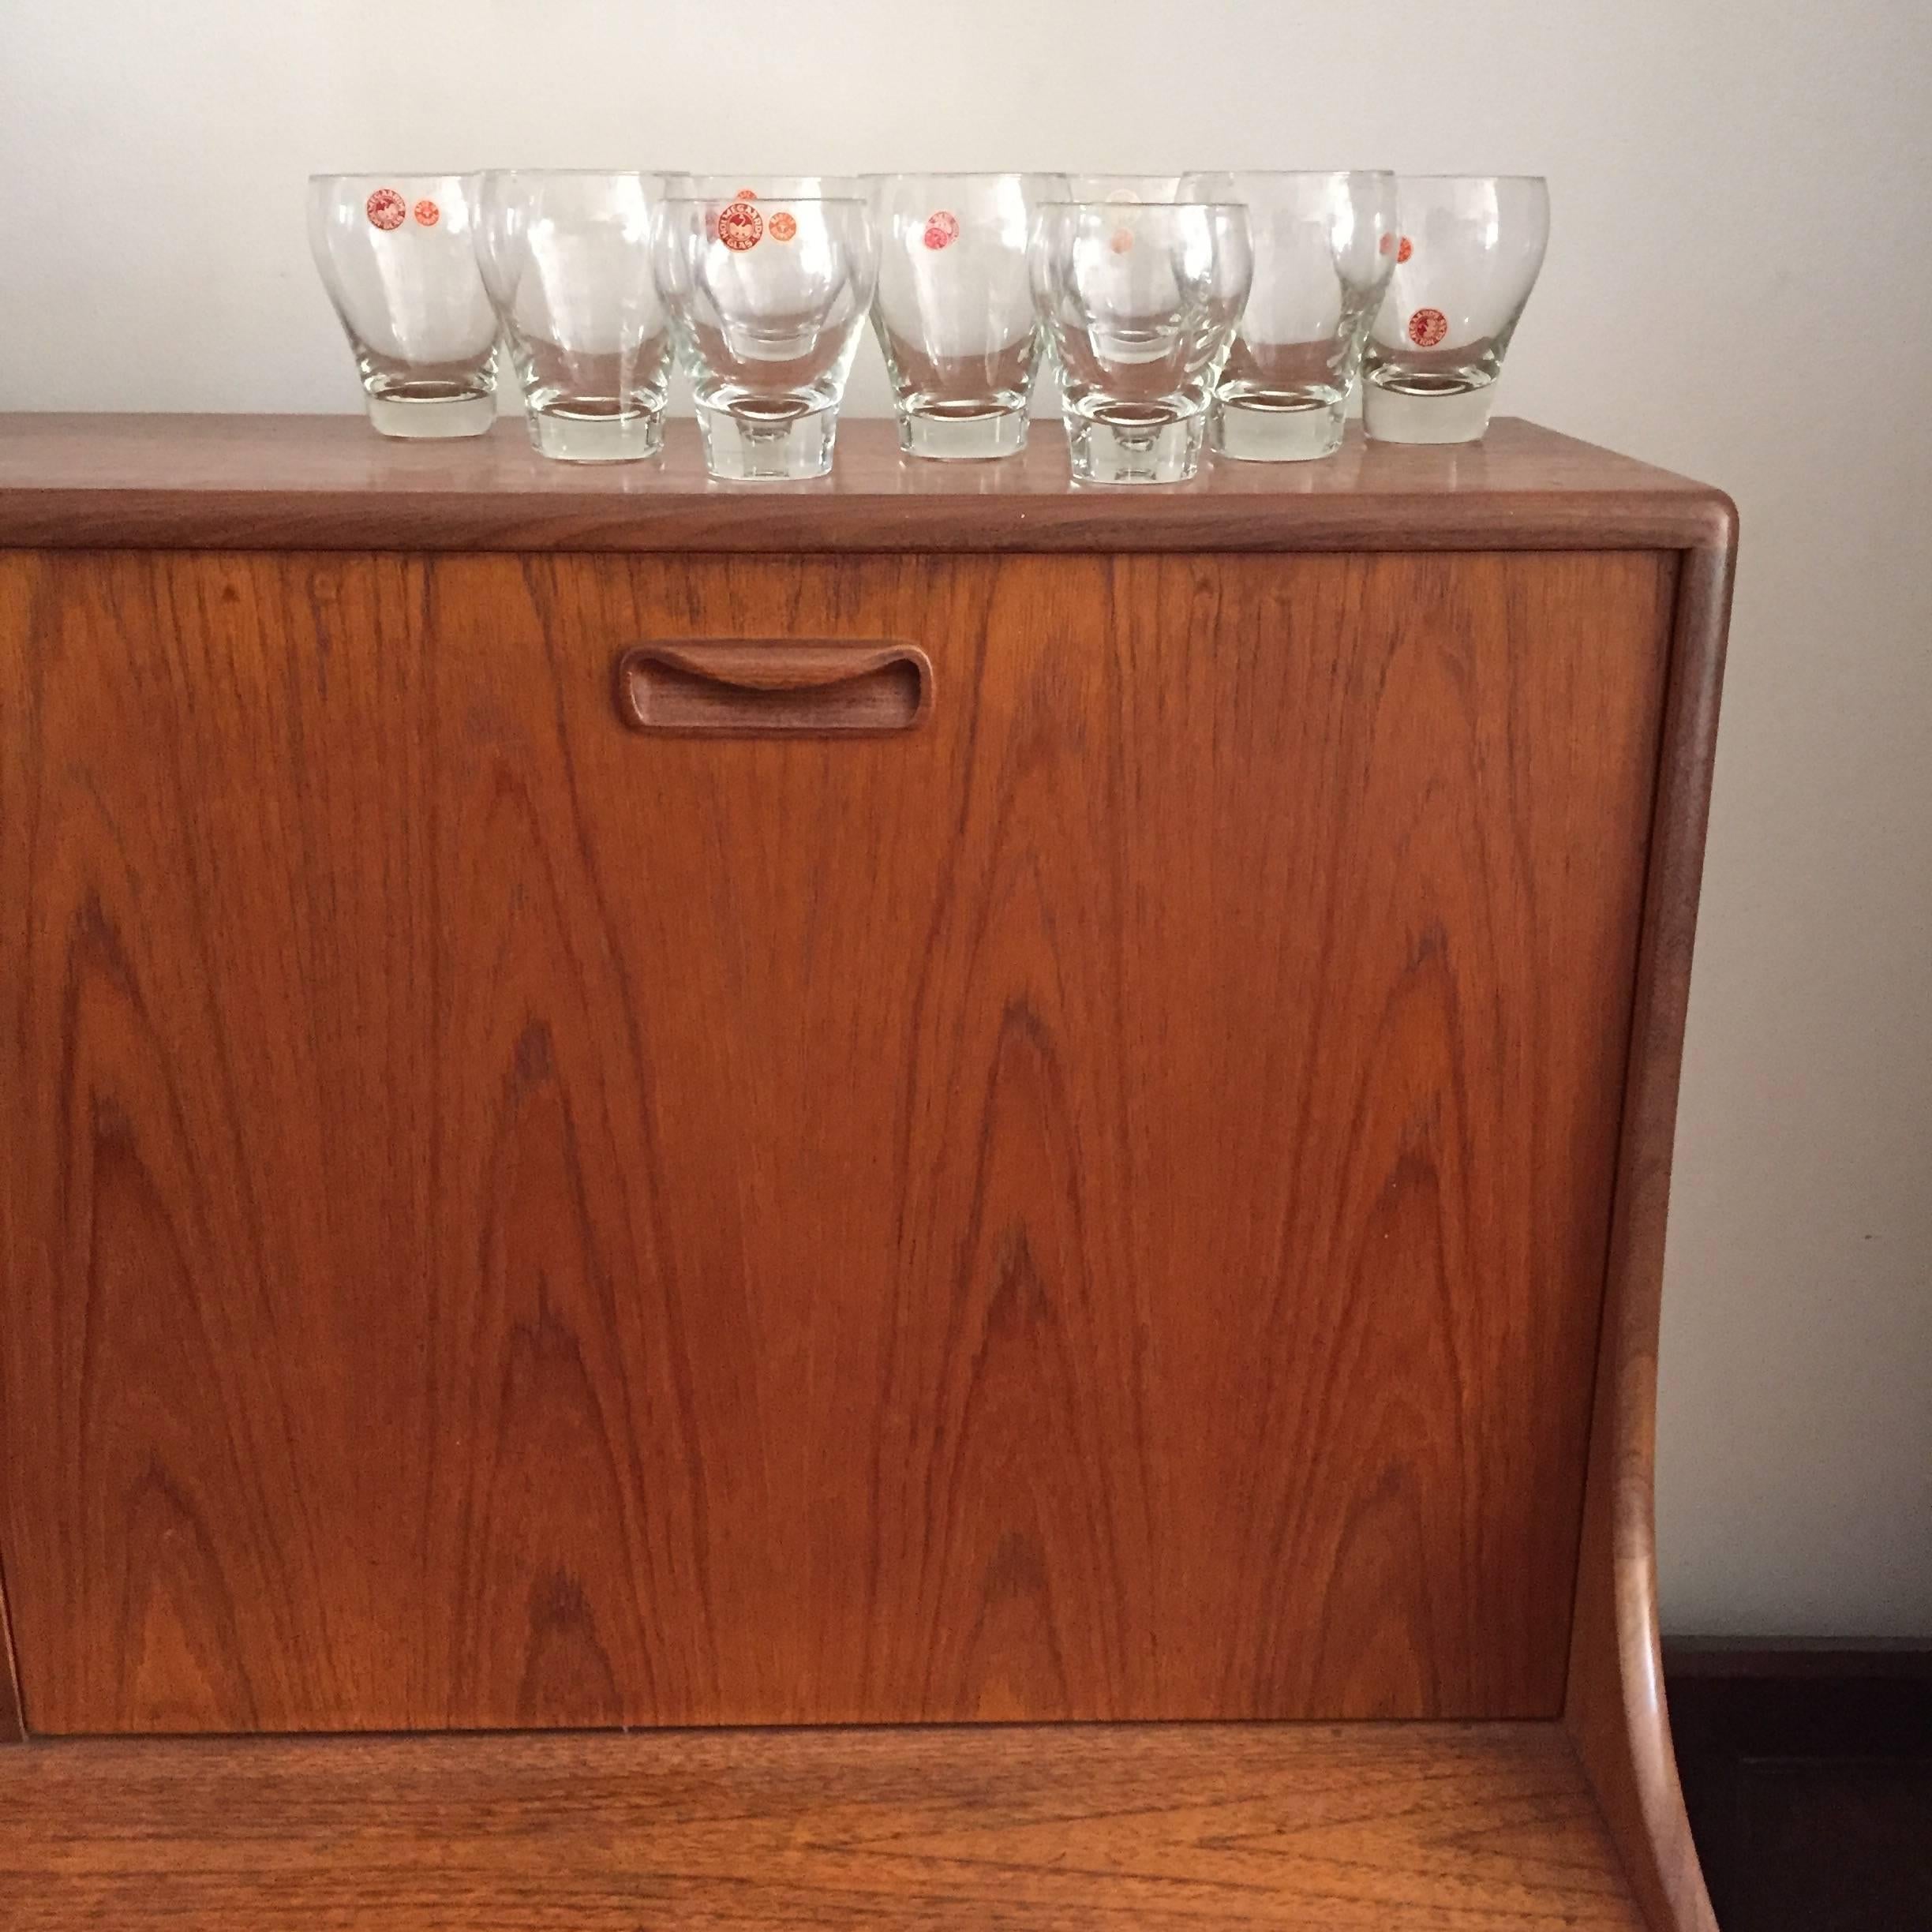 Per Lütken Holmegaard Danish Glass Tumblers, Eight In Excellent Condition For Sale In Brooklyn, NY